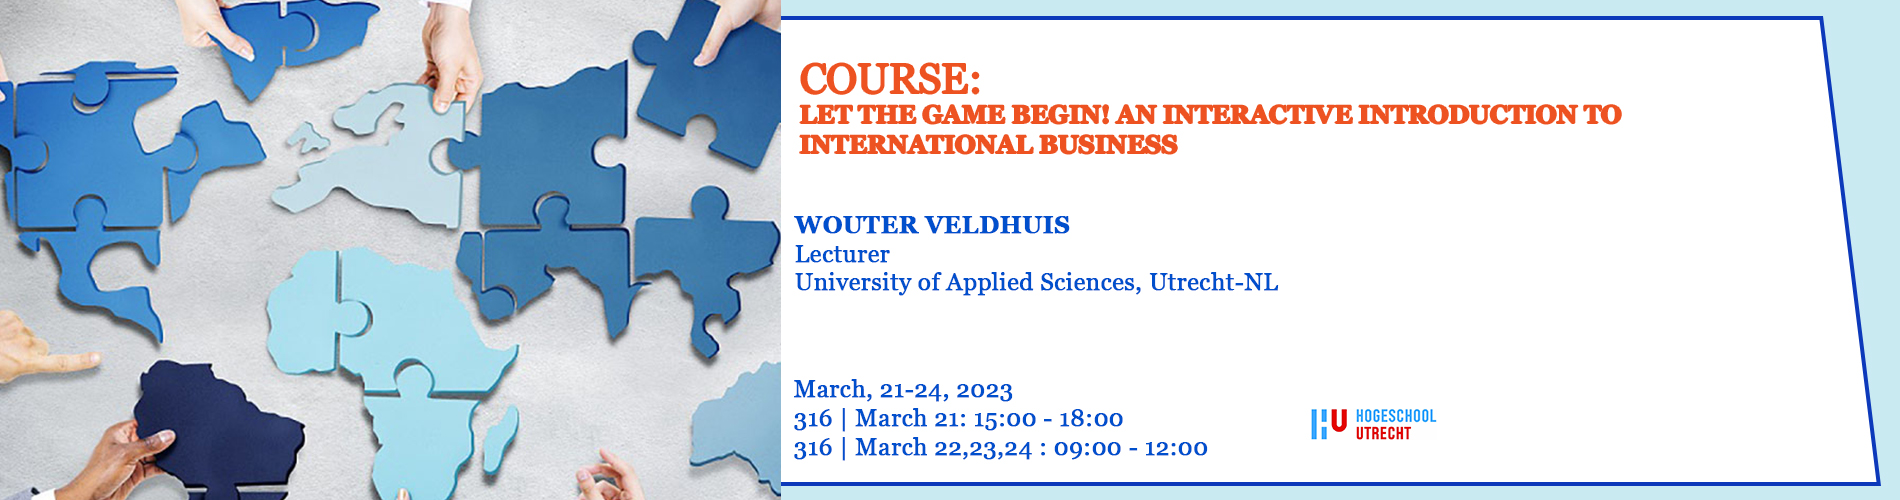 20230321_-_20230324_-_Let_the_game_begin_An_interactive_introduction_to_International_Business